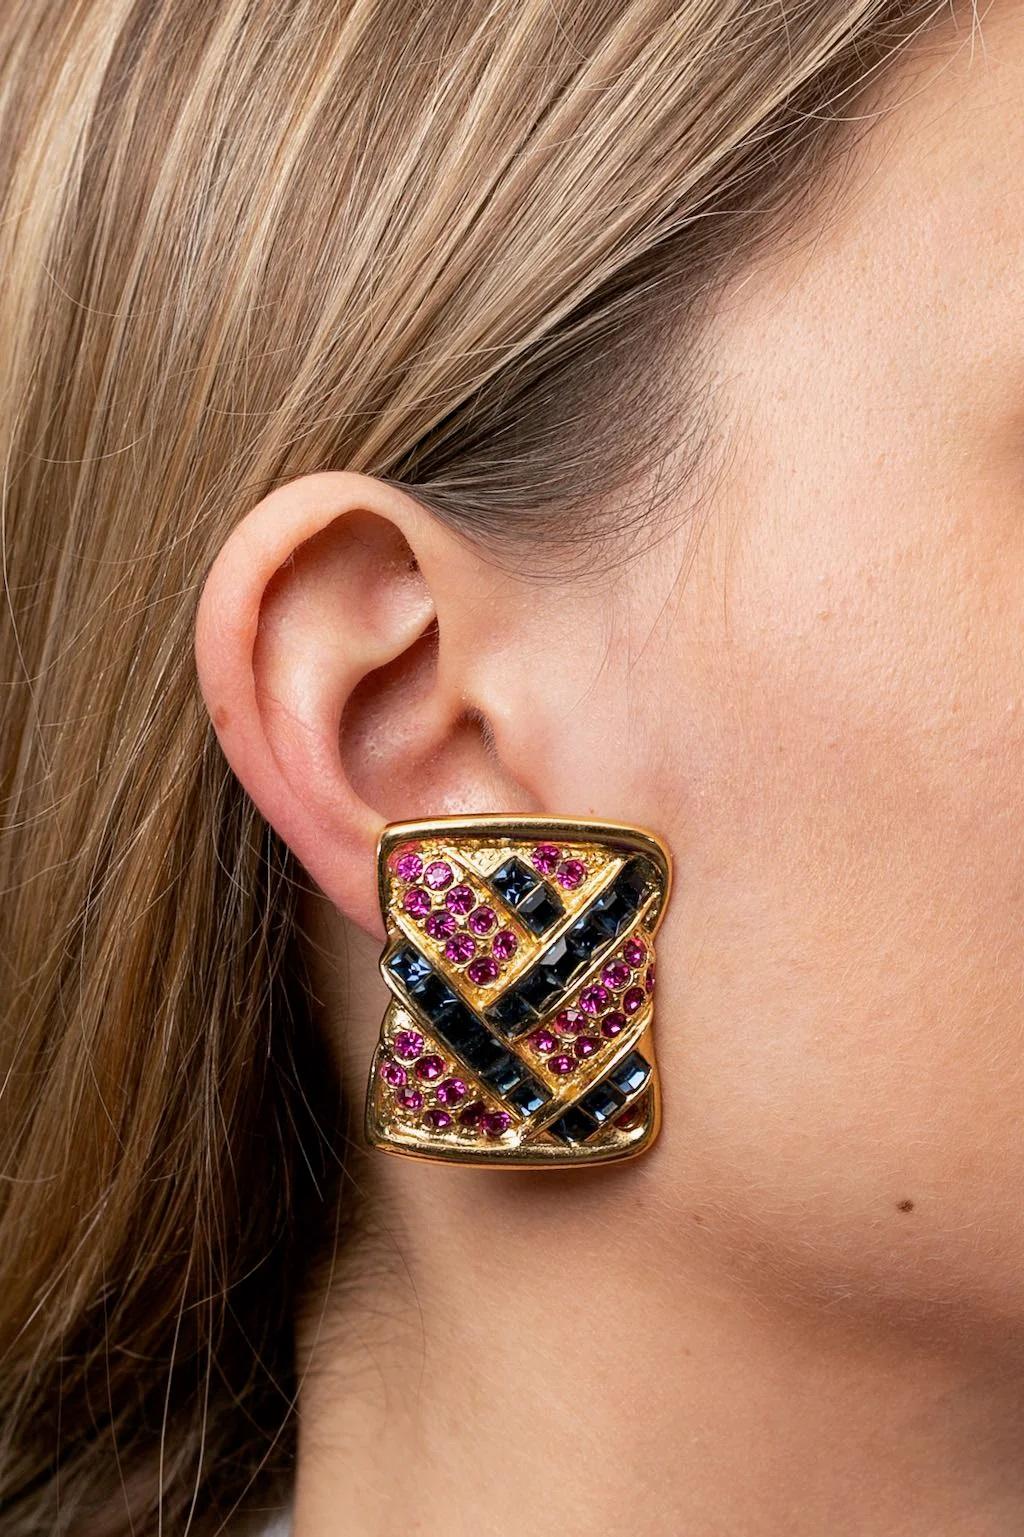 Yves Saint Laurent (Made in France) Gilted metal clip-on earrings paved with pink and blue rhinestones.

Additional information:
Dimensions: 3 W x 4 H cm (1.18